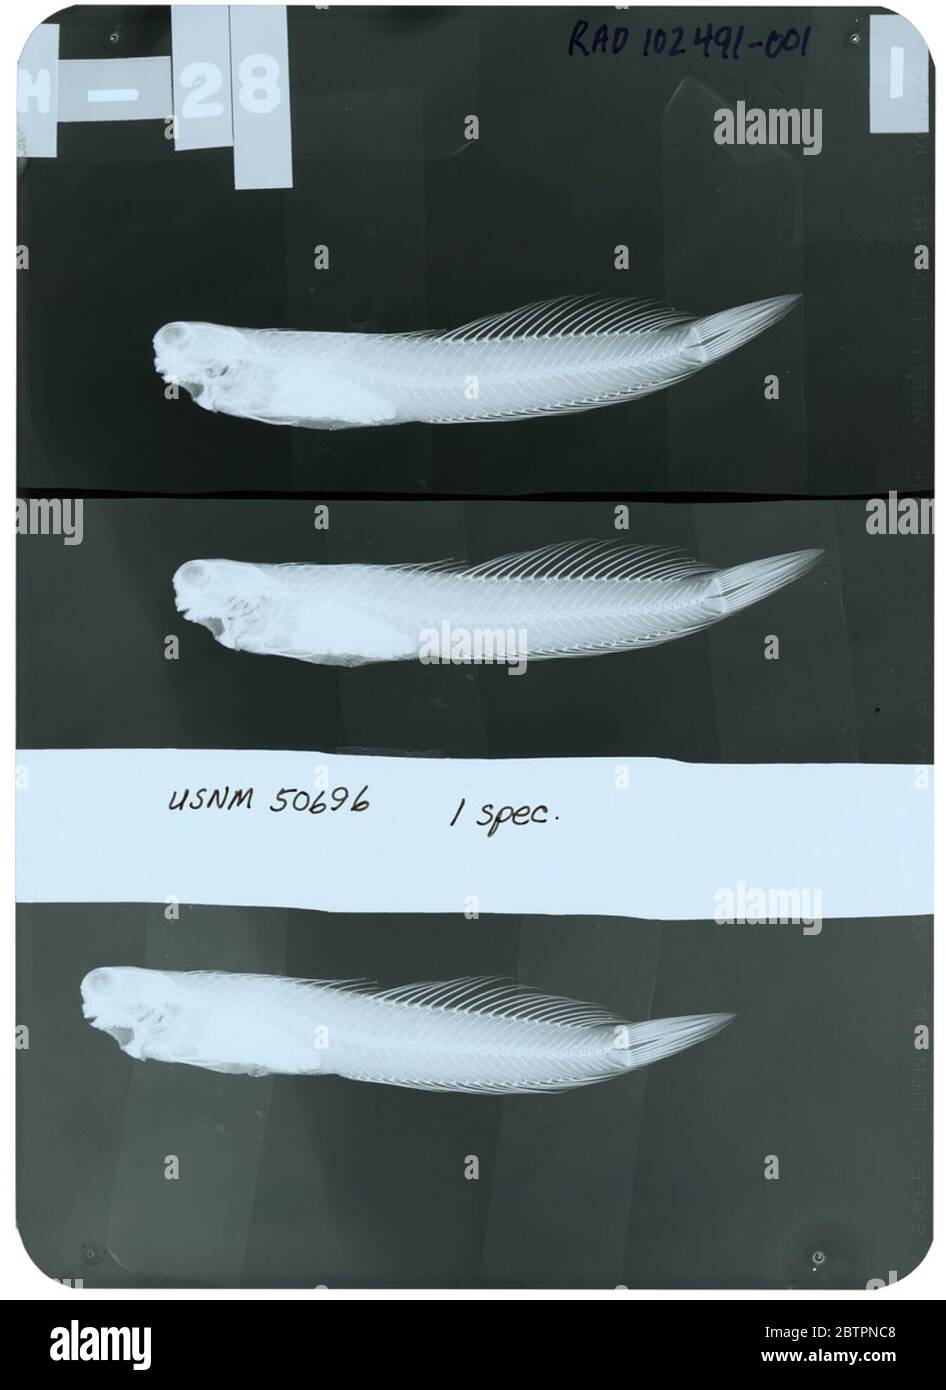 Salarias saltans Jenkins. Radiograph is of a holotype; The Smithsonian NMNH Division of Fishes uses the convention of maintaining the original species name for type specimens designated at the time of description. The currently accepted name for this species is Blenniella gibbifrons.24 Oct 20181 Stock Photo